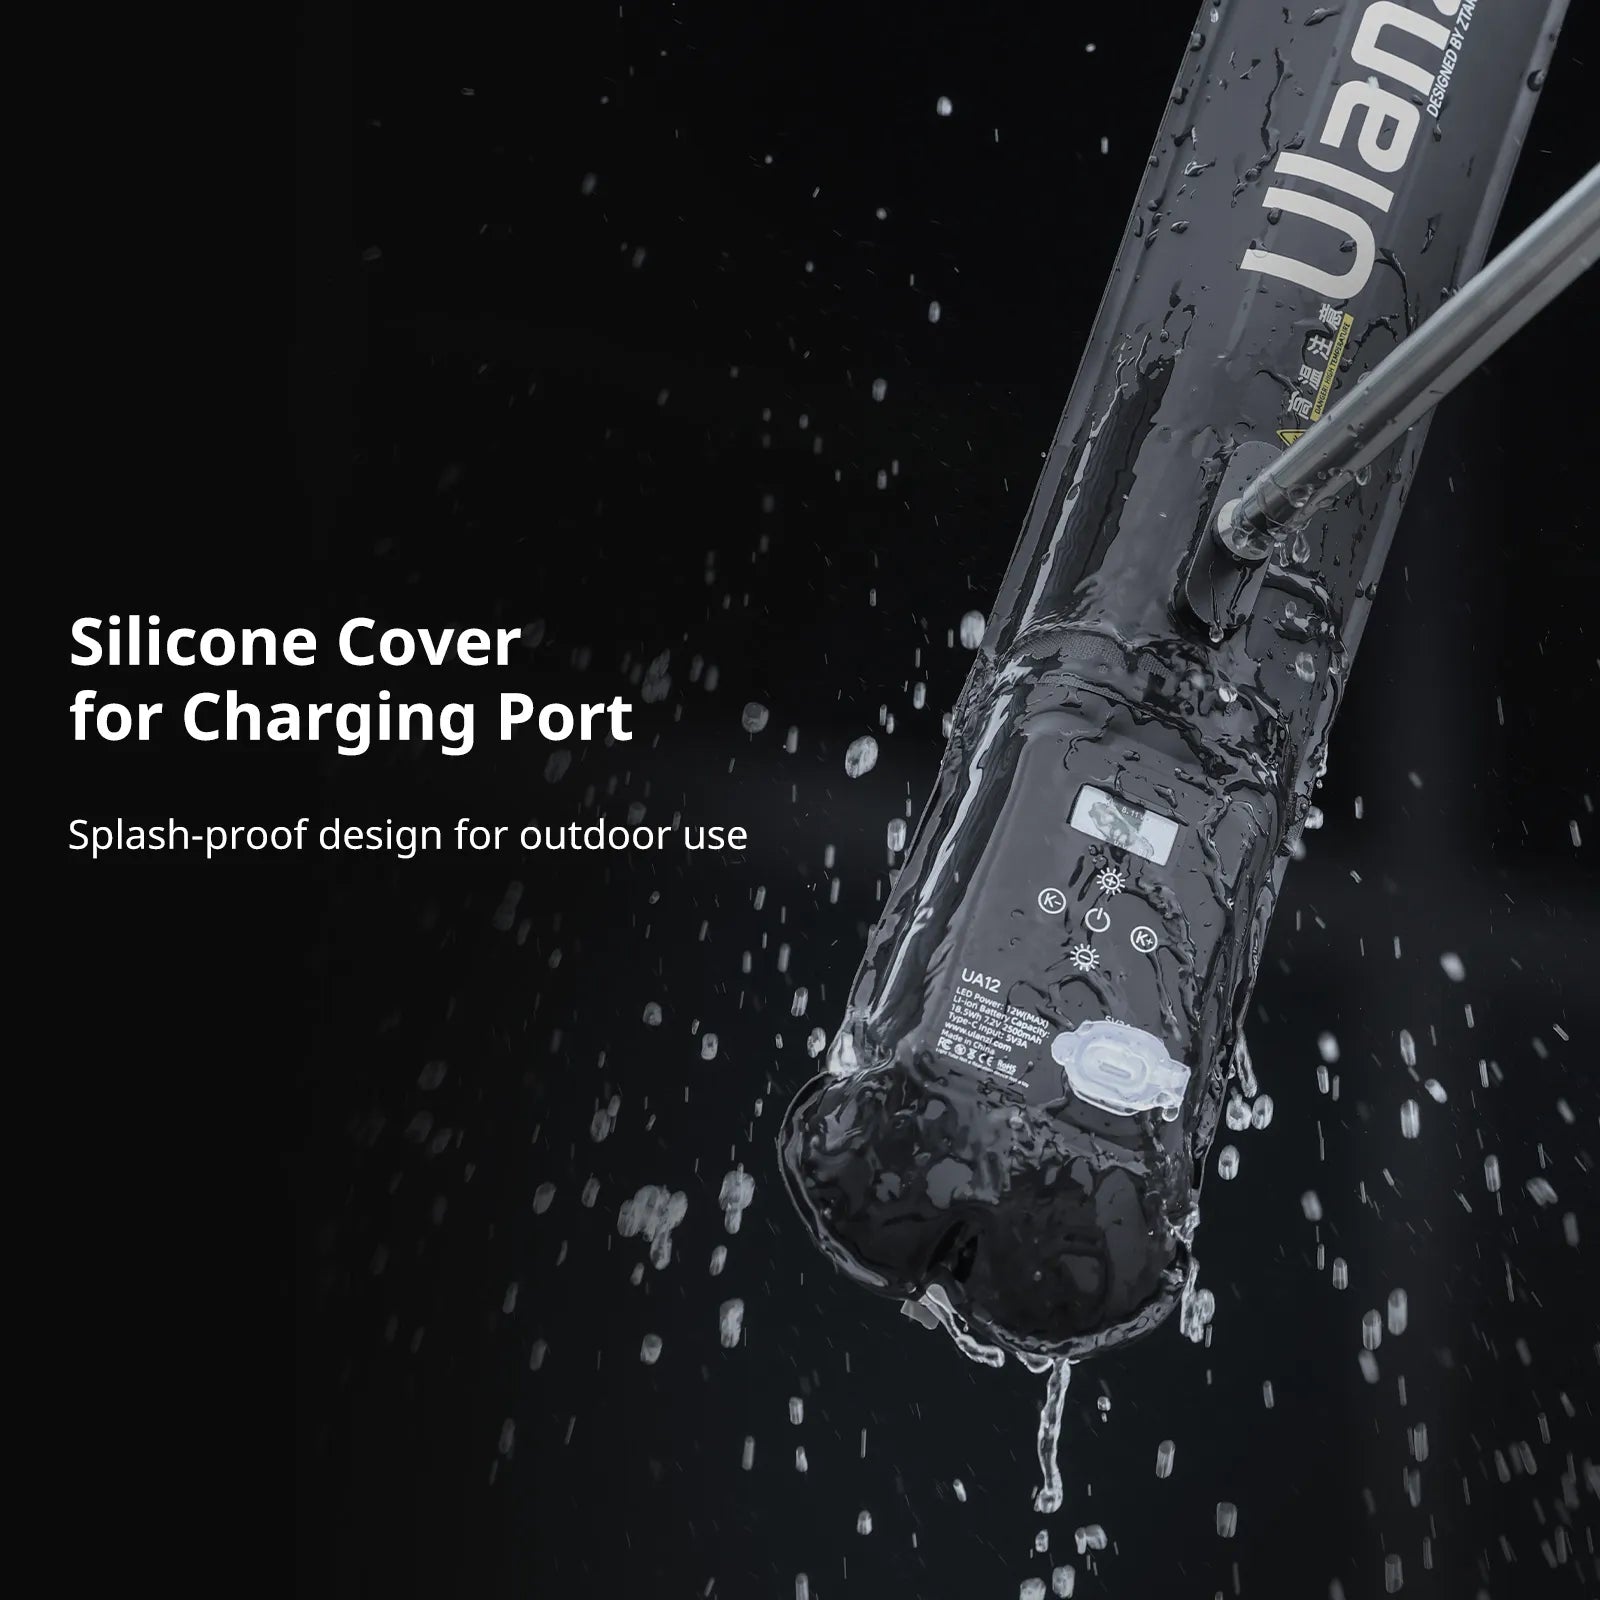 Silicone Cover for Charging Port